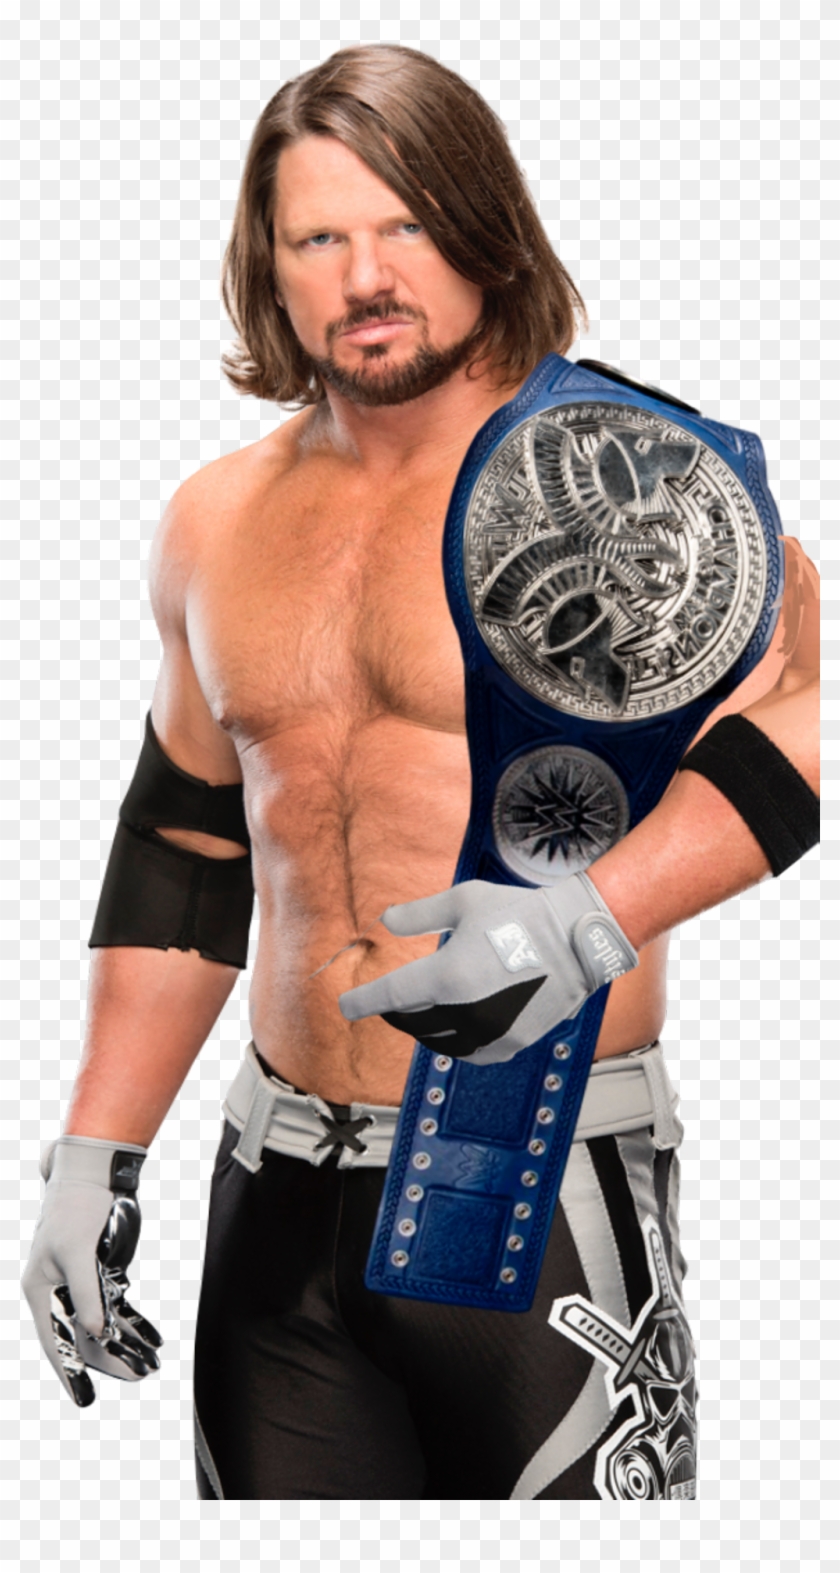 Ajstyles Image - Wwe Aj Styles United States Champion Clipart #487334